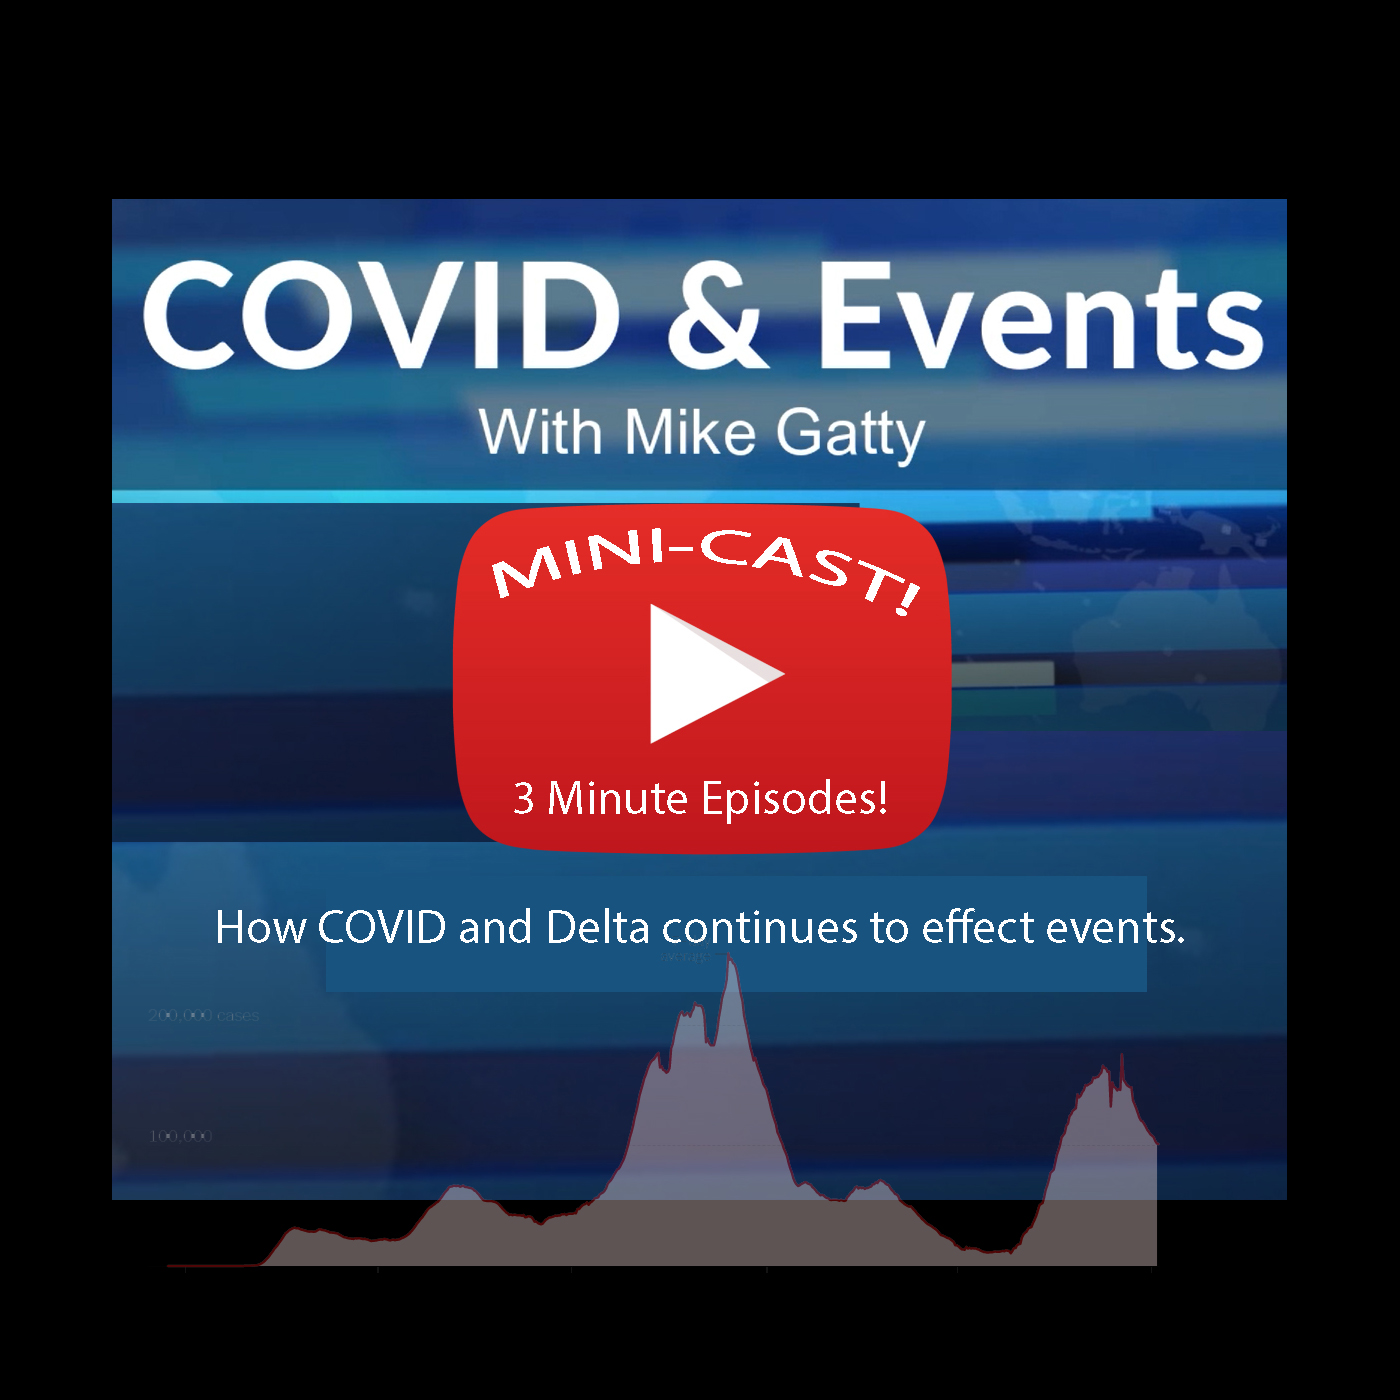 COVID and Events Episode 1